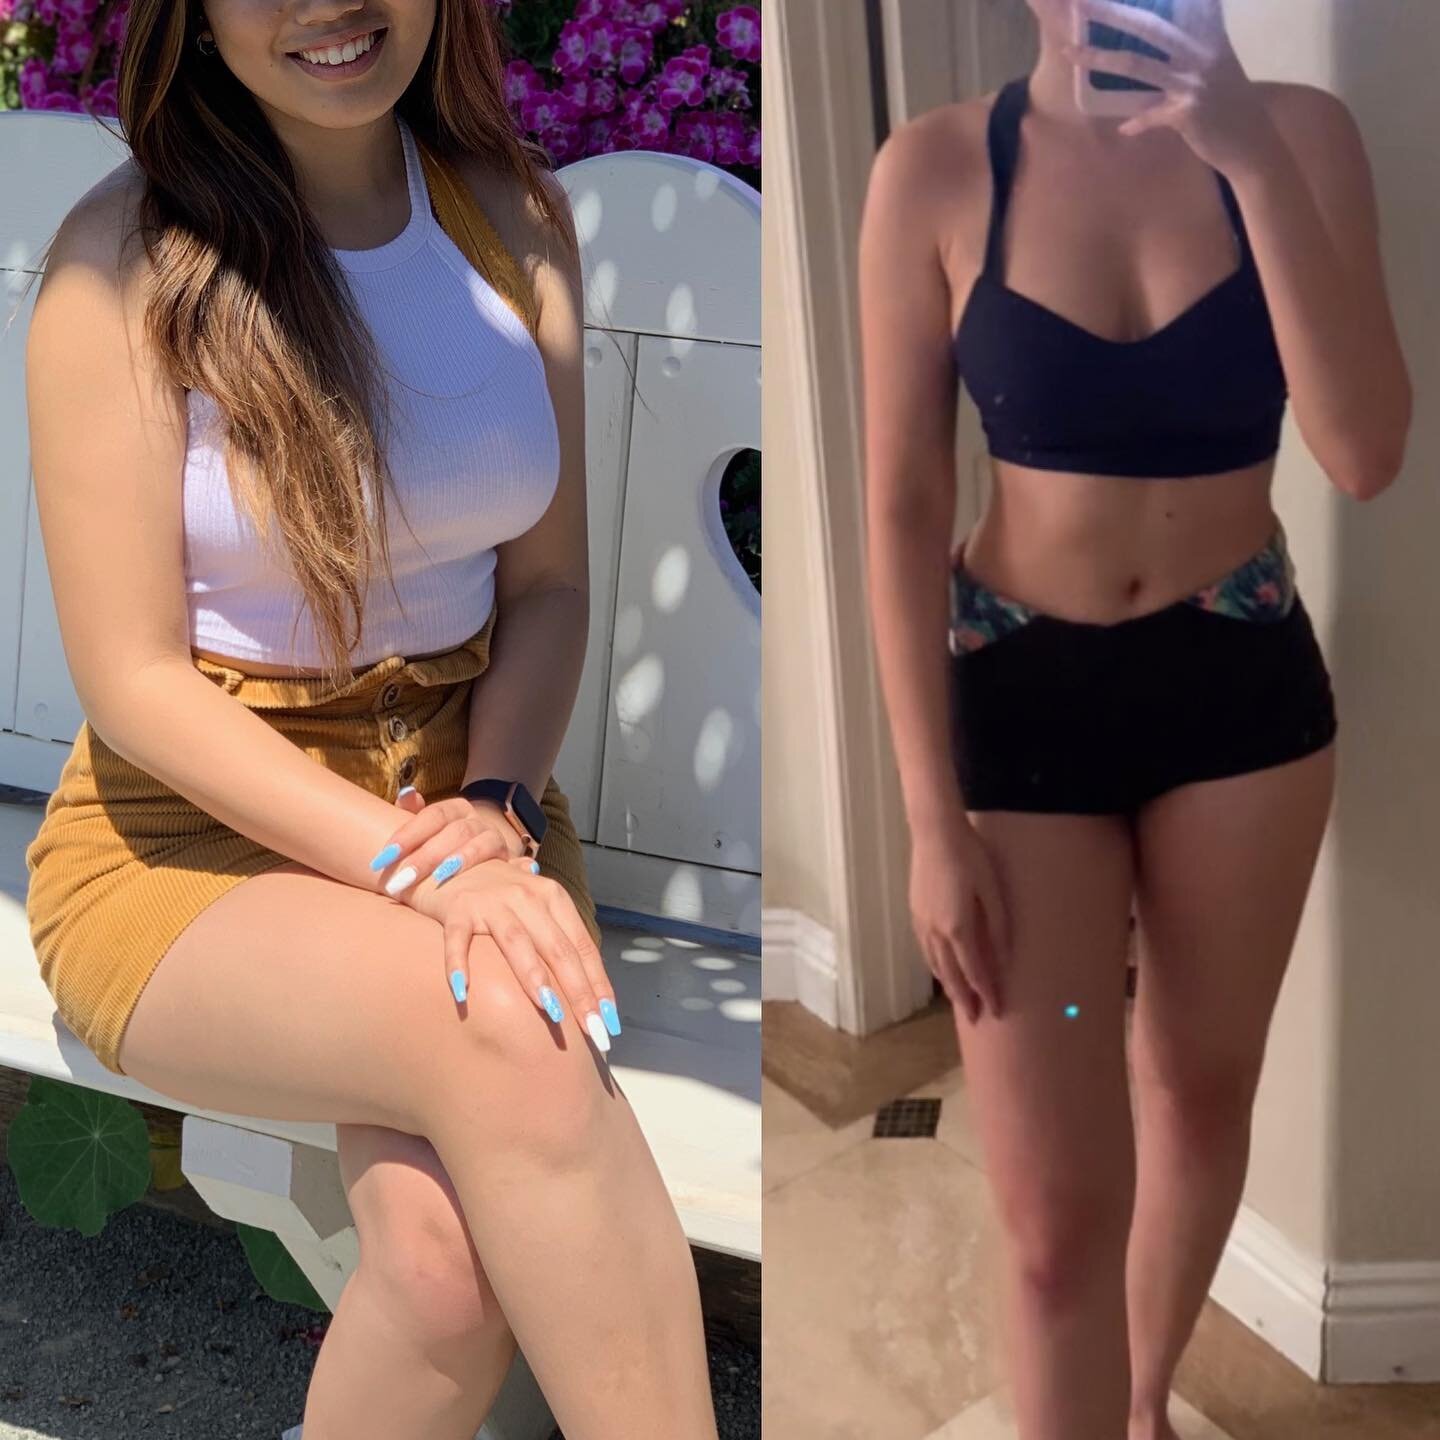 Transformation Tuesday 💥💞

Client testimonial: 
From weighing at my heaviest of 137.2 lbs. on June 1st, I was able to lower my weight down to 129 lbs. by July 26th. All thanks to Phil who has been nothing more but motivating, encouraging, and infor